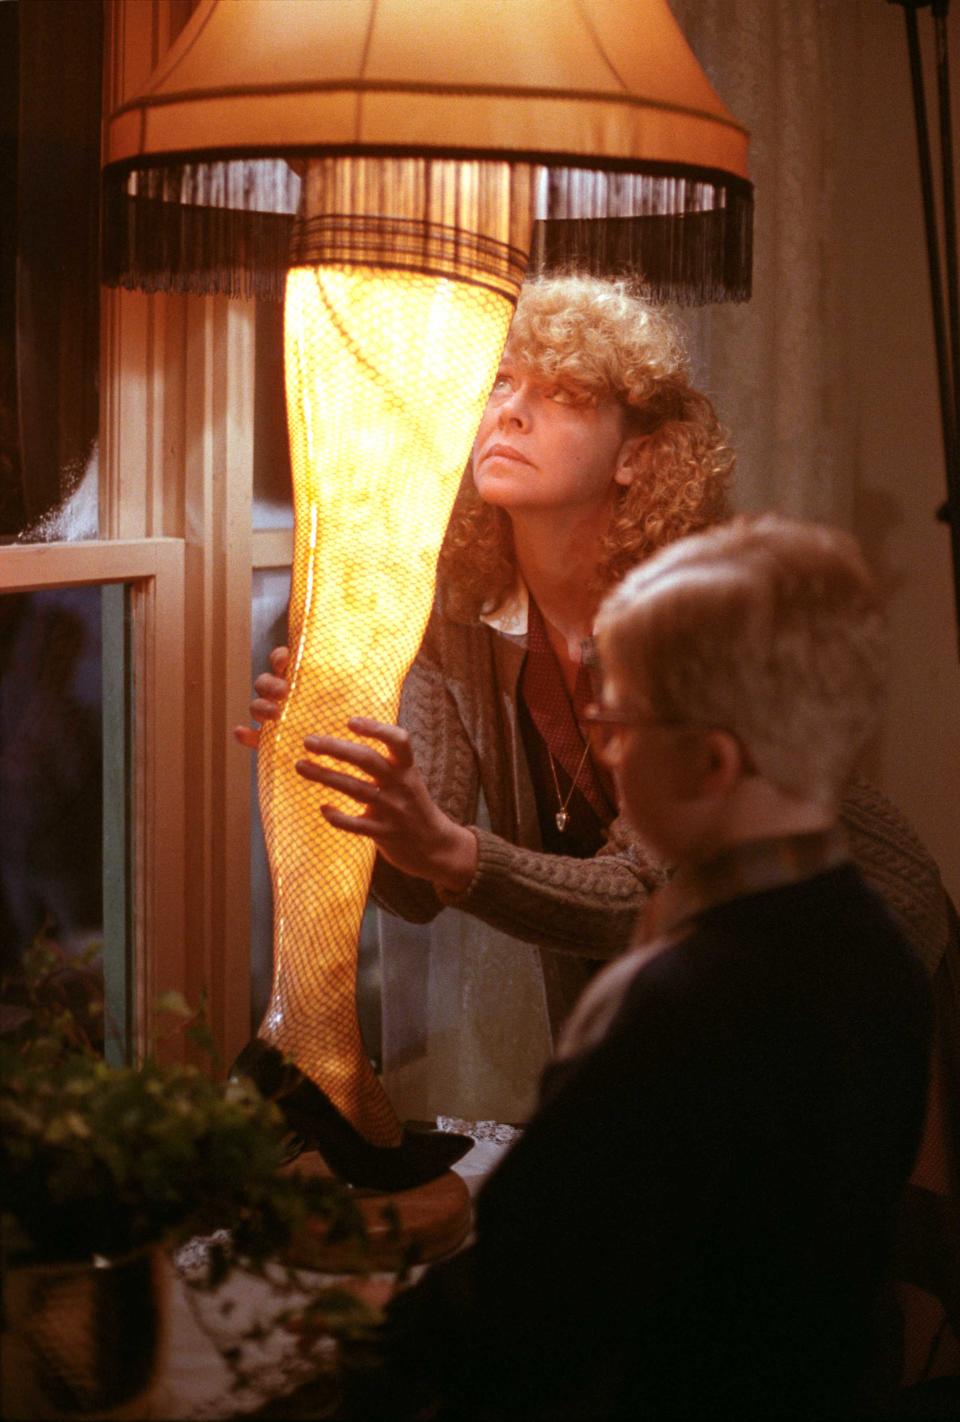 Melinda Dillon and Peter Billingsley appear with the famed leg lamp in a scene from the 1983 movie "A Christmas Story." To mark its 40th anniversary, the film is returning to theaters nationwide Dec. 10 and 13 via Fathom Events.